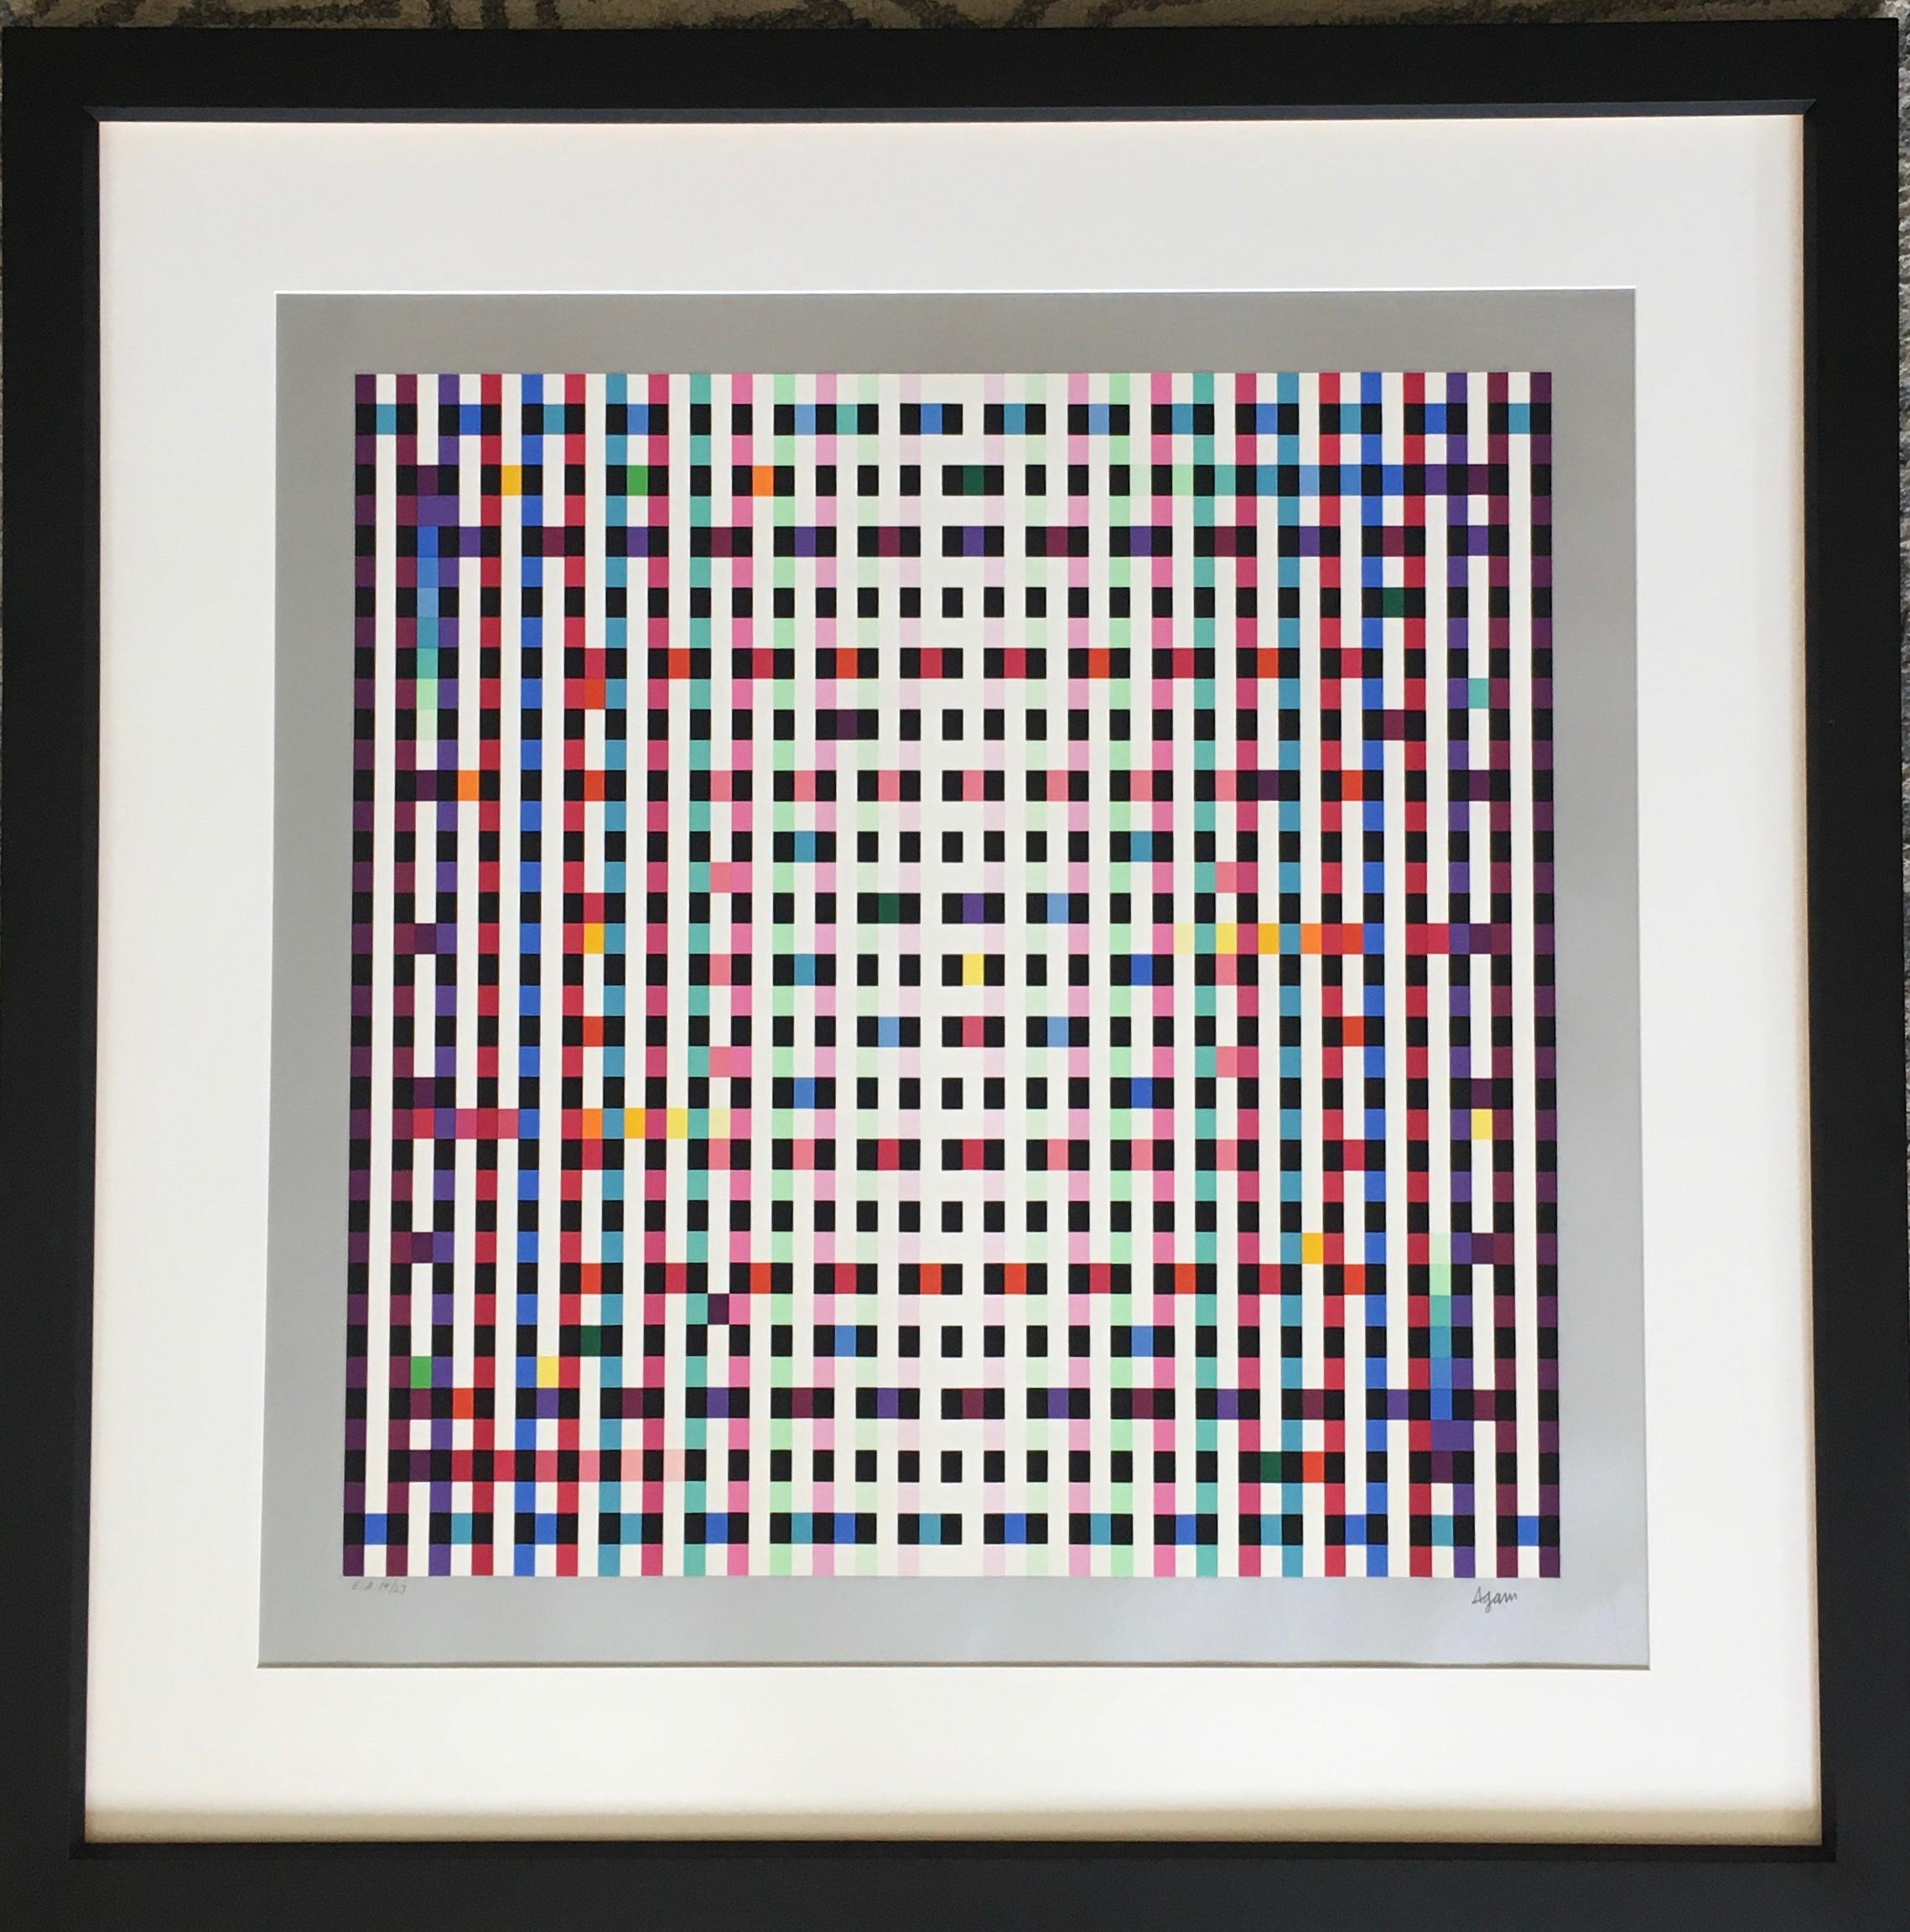 Yaacov Agam (Israeli, born 1928)
Untitled, late 20th century
Serigraph in colors on wove paper with silver slight metallic border
Artist's Proof. Marked 'E.A. 14/27' in pencil lower left. (épreuve d'artiste)
Signed in pencil lower right
24 3/4in H x